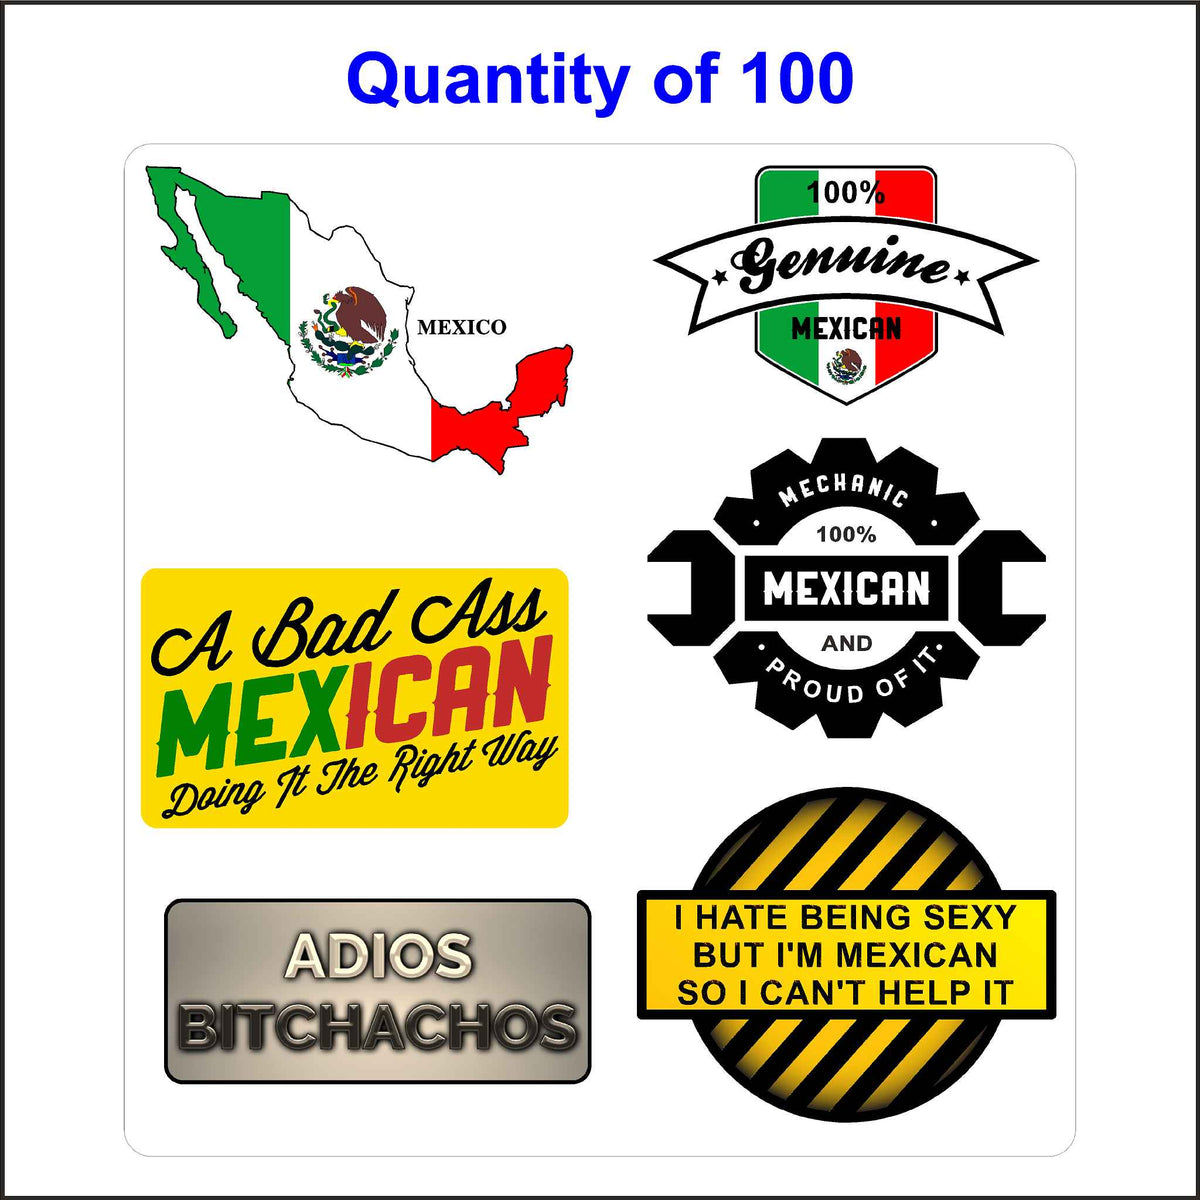 Funny Mexican Hard Hat Stickers, Bad Ass Mexican, Adios Bitchachos. 100 Quantity.